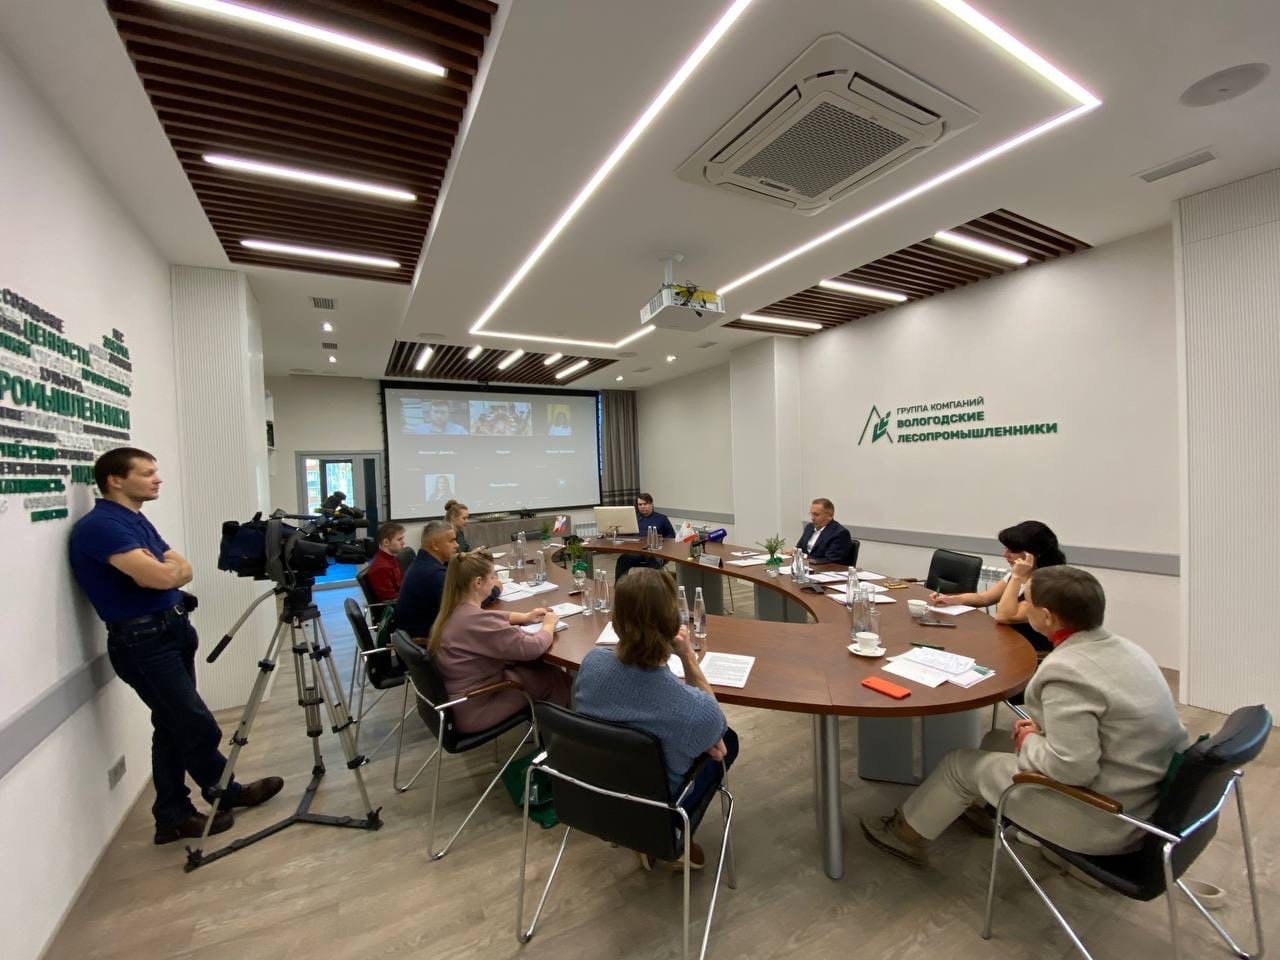 The traditional press conference dedicated to the Company Day was held by the Vologda timber industry workers